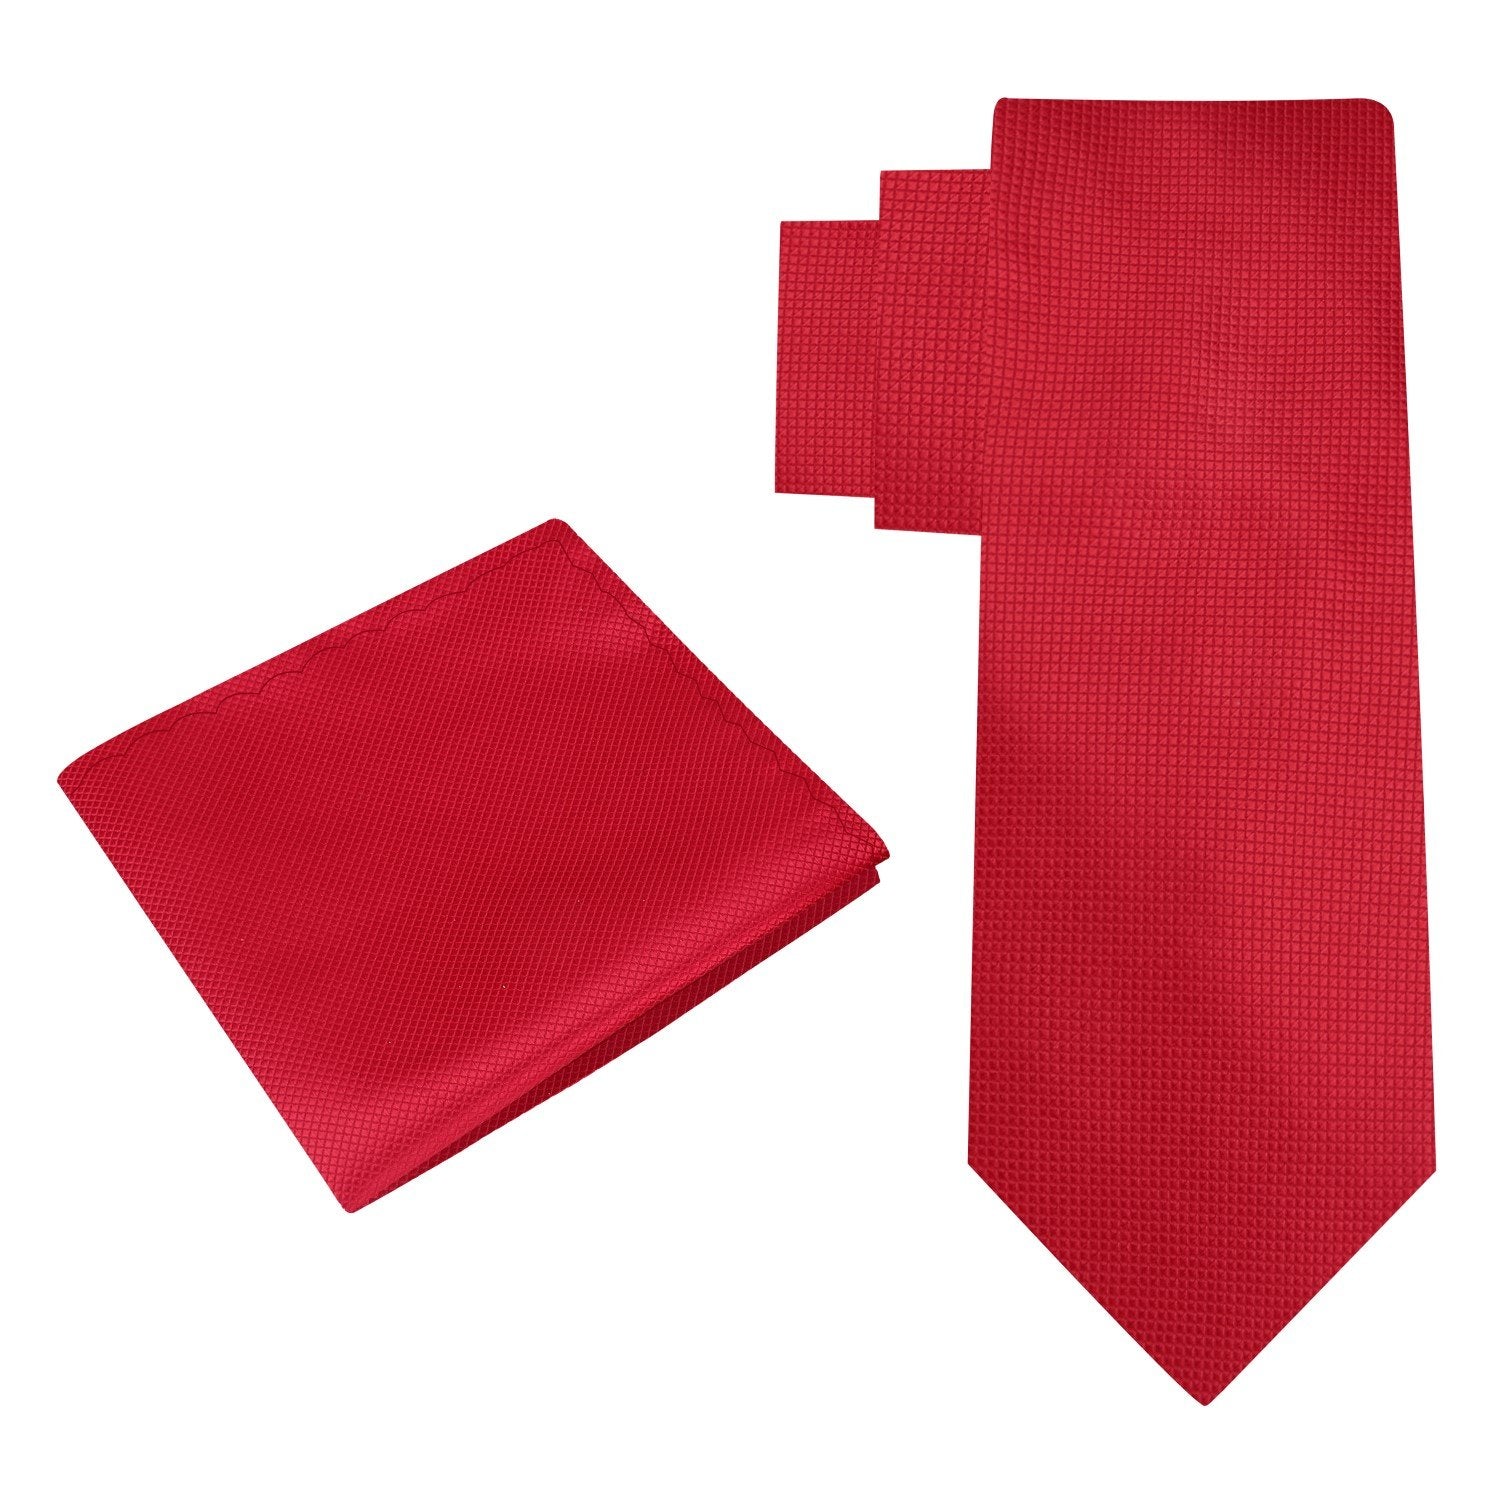 Alt View: A Solid Red With Check Texture Pattern Silk Necktie, Matching Pocket Square